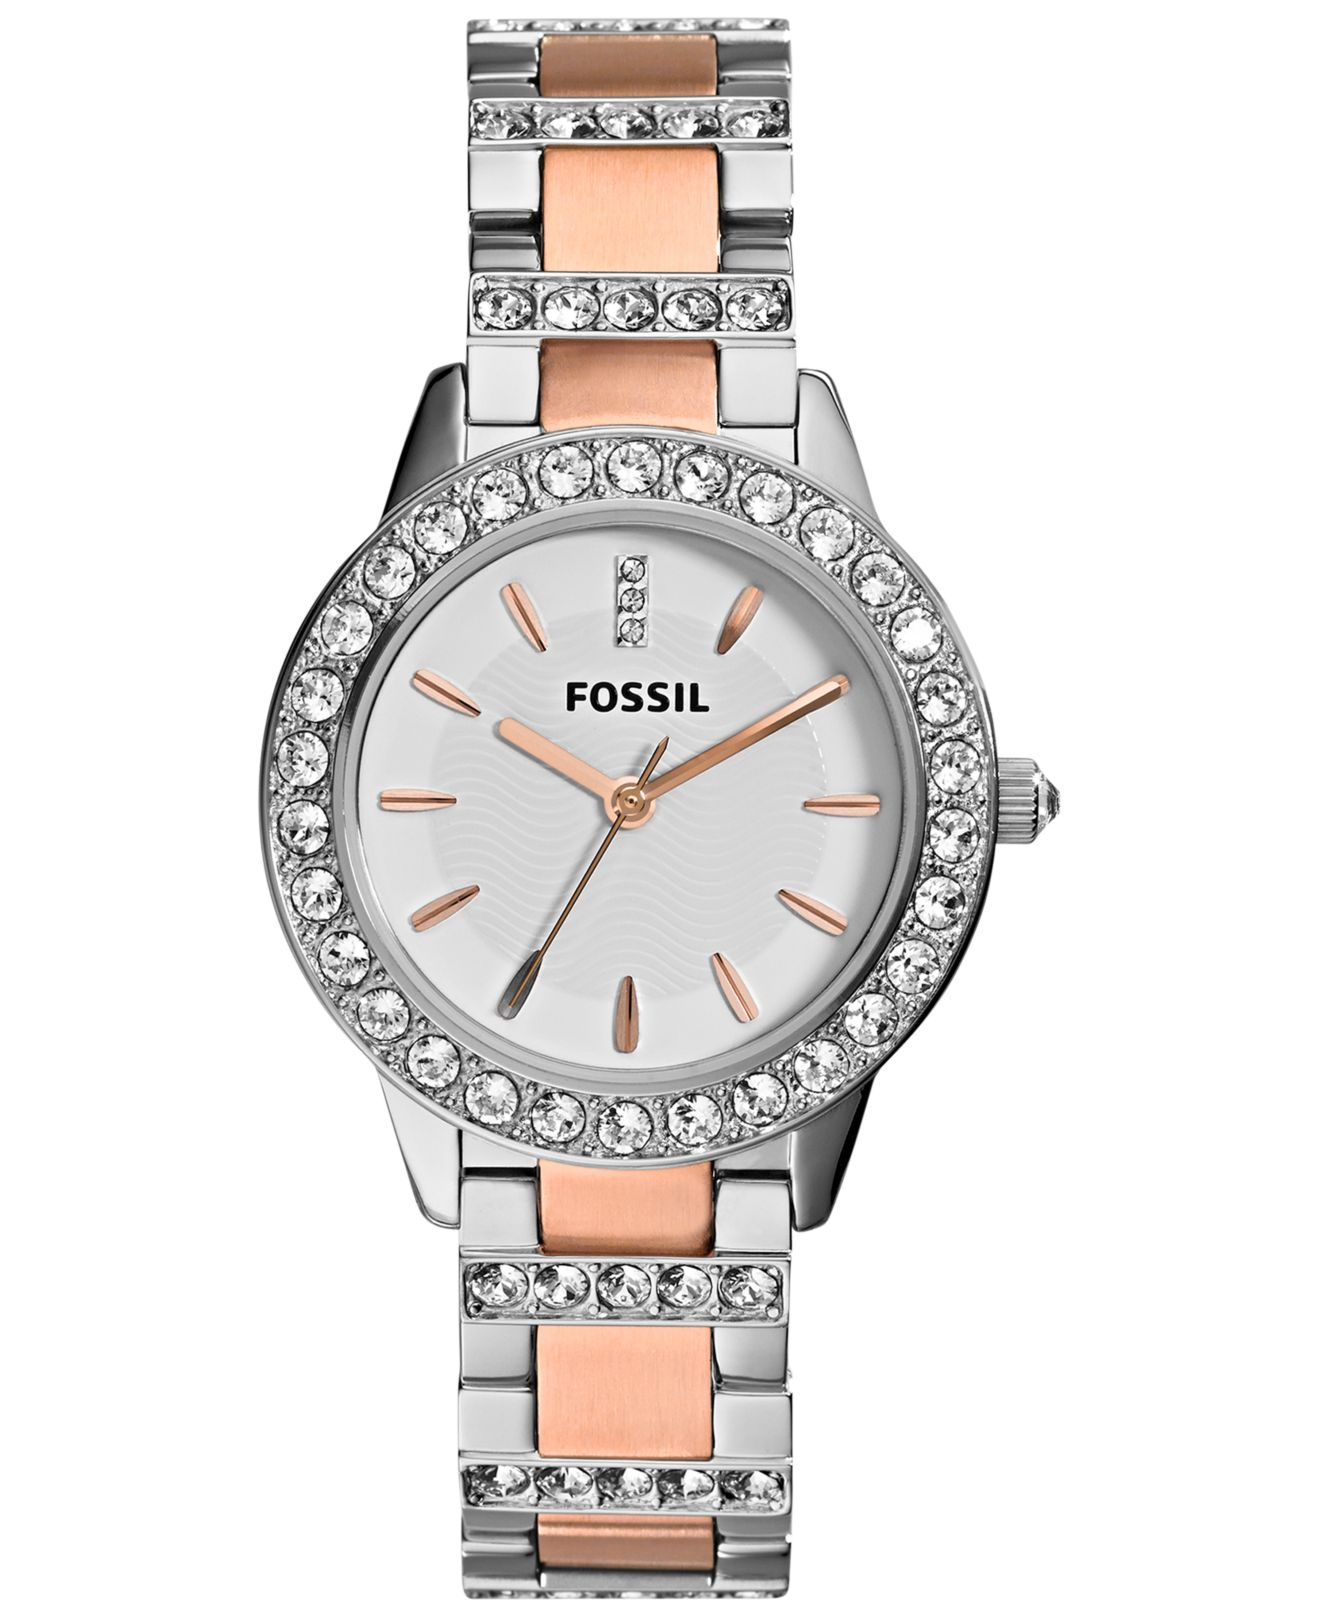 Lyst - Fossil Women's Jesse Crystal Accent Two-tone Stainless Steel Fossil Jesse Stainless Steel Watch